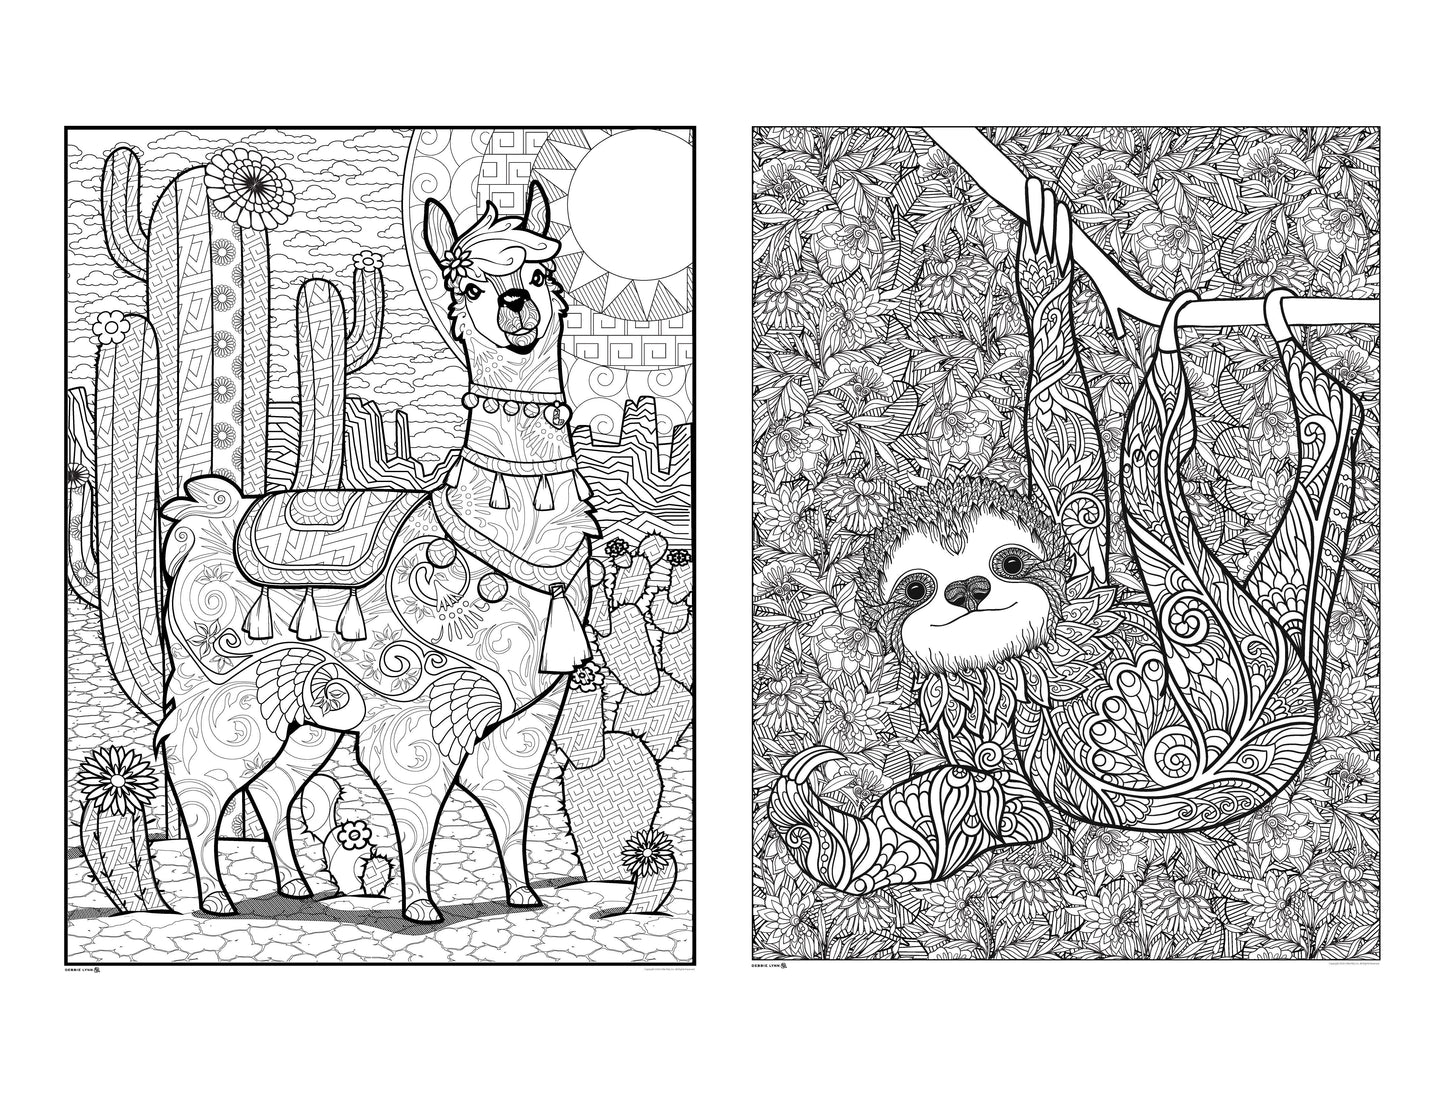 Llama & Sloth 2in1 Combo Giant Coloring Poster